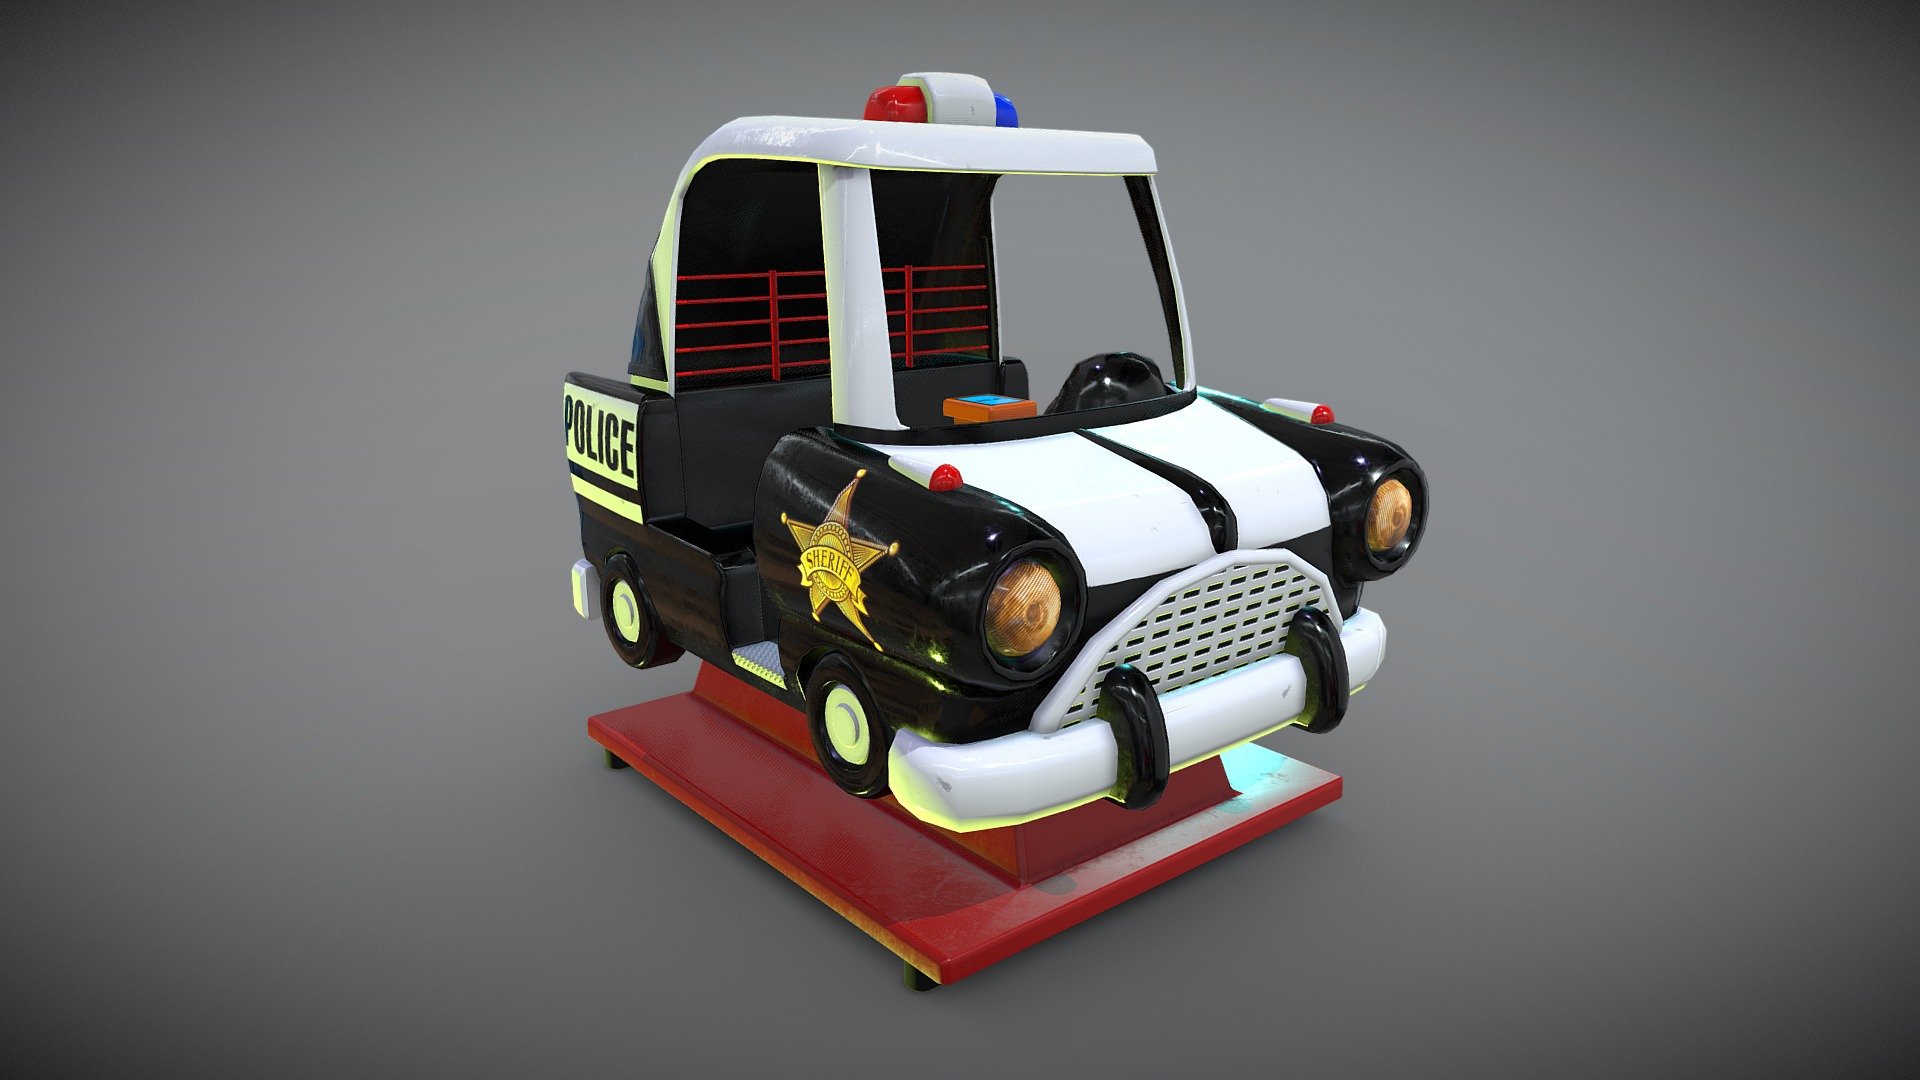 This model was made using blender 3d and textures using substance painter and photoshop. All textures are png format with 4k resolution.




Police_BaseColor.png (4096x4096).

Police_AO.png (4096x4096).

Police_Roughness.png (4096x4096).

Police_Normal.png (4096x4096).

Police_Metallic.png (4096x4096).
 - Police Coin Operated Ride - Buy Royalty Free 3D model by lademadane 3d model